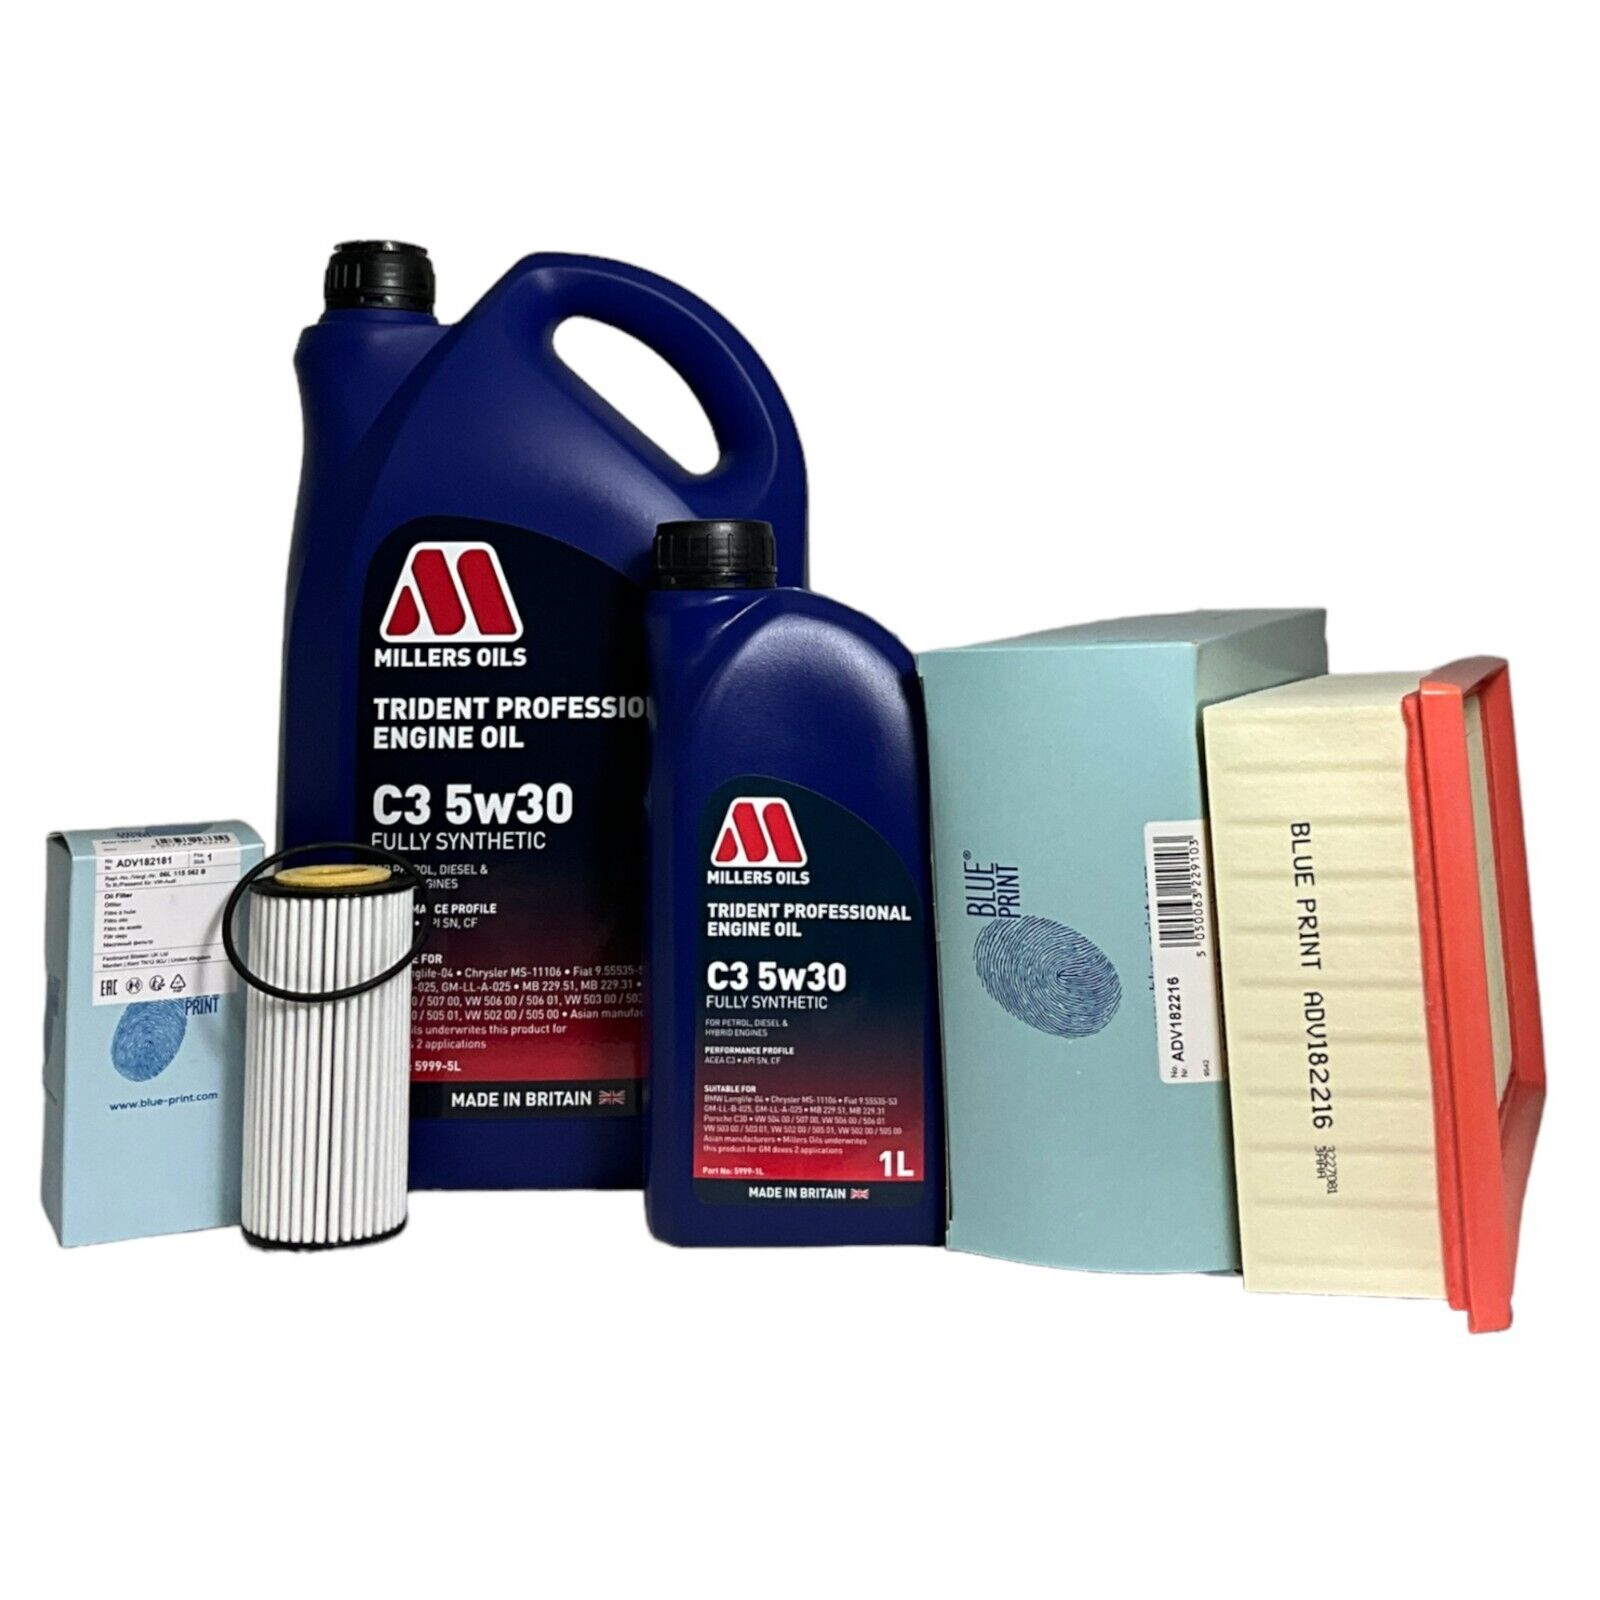 Audi TT 2.0 TFSI Service Kit Millers Oil Trident C3 5W30 with Oil and Air Filter